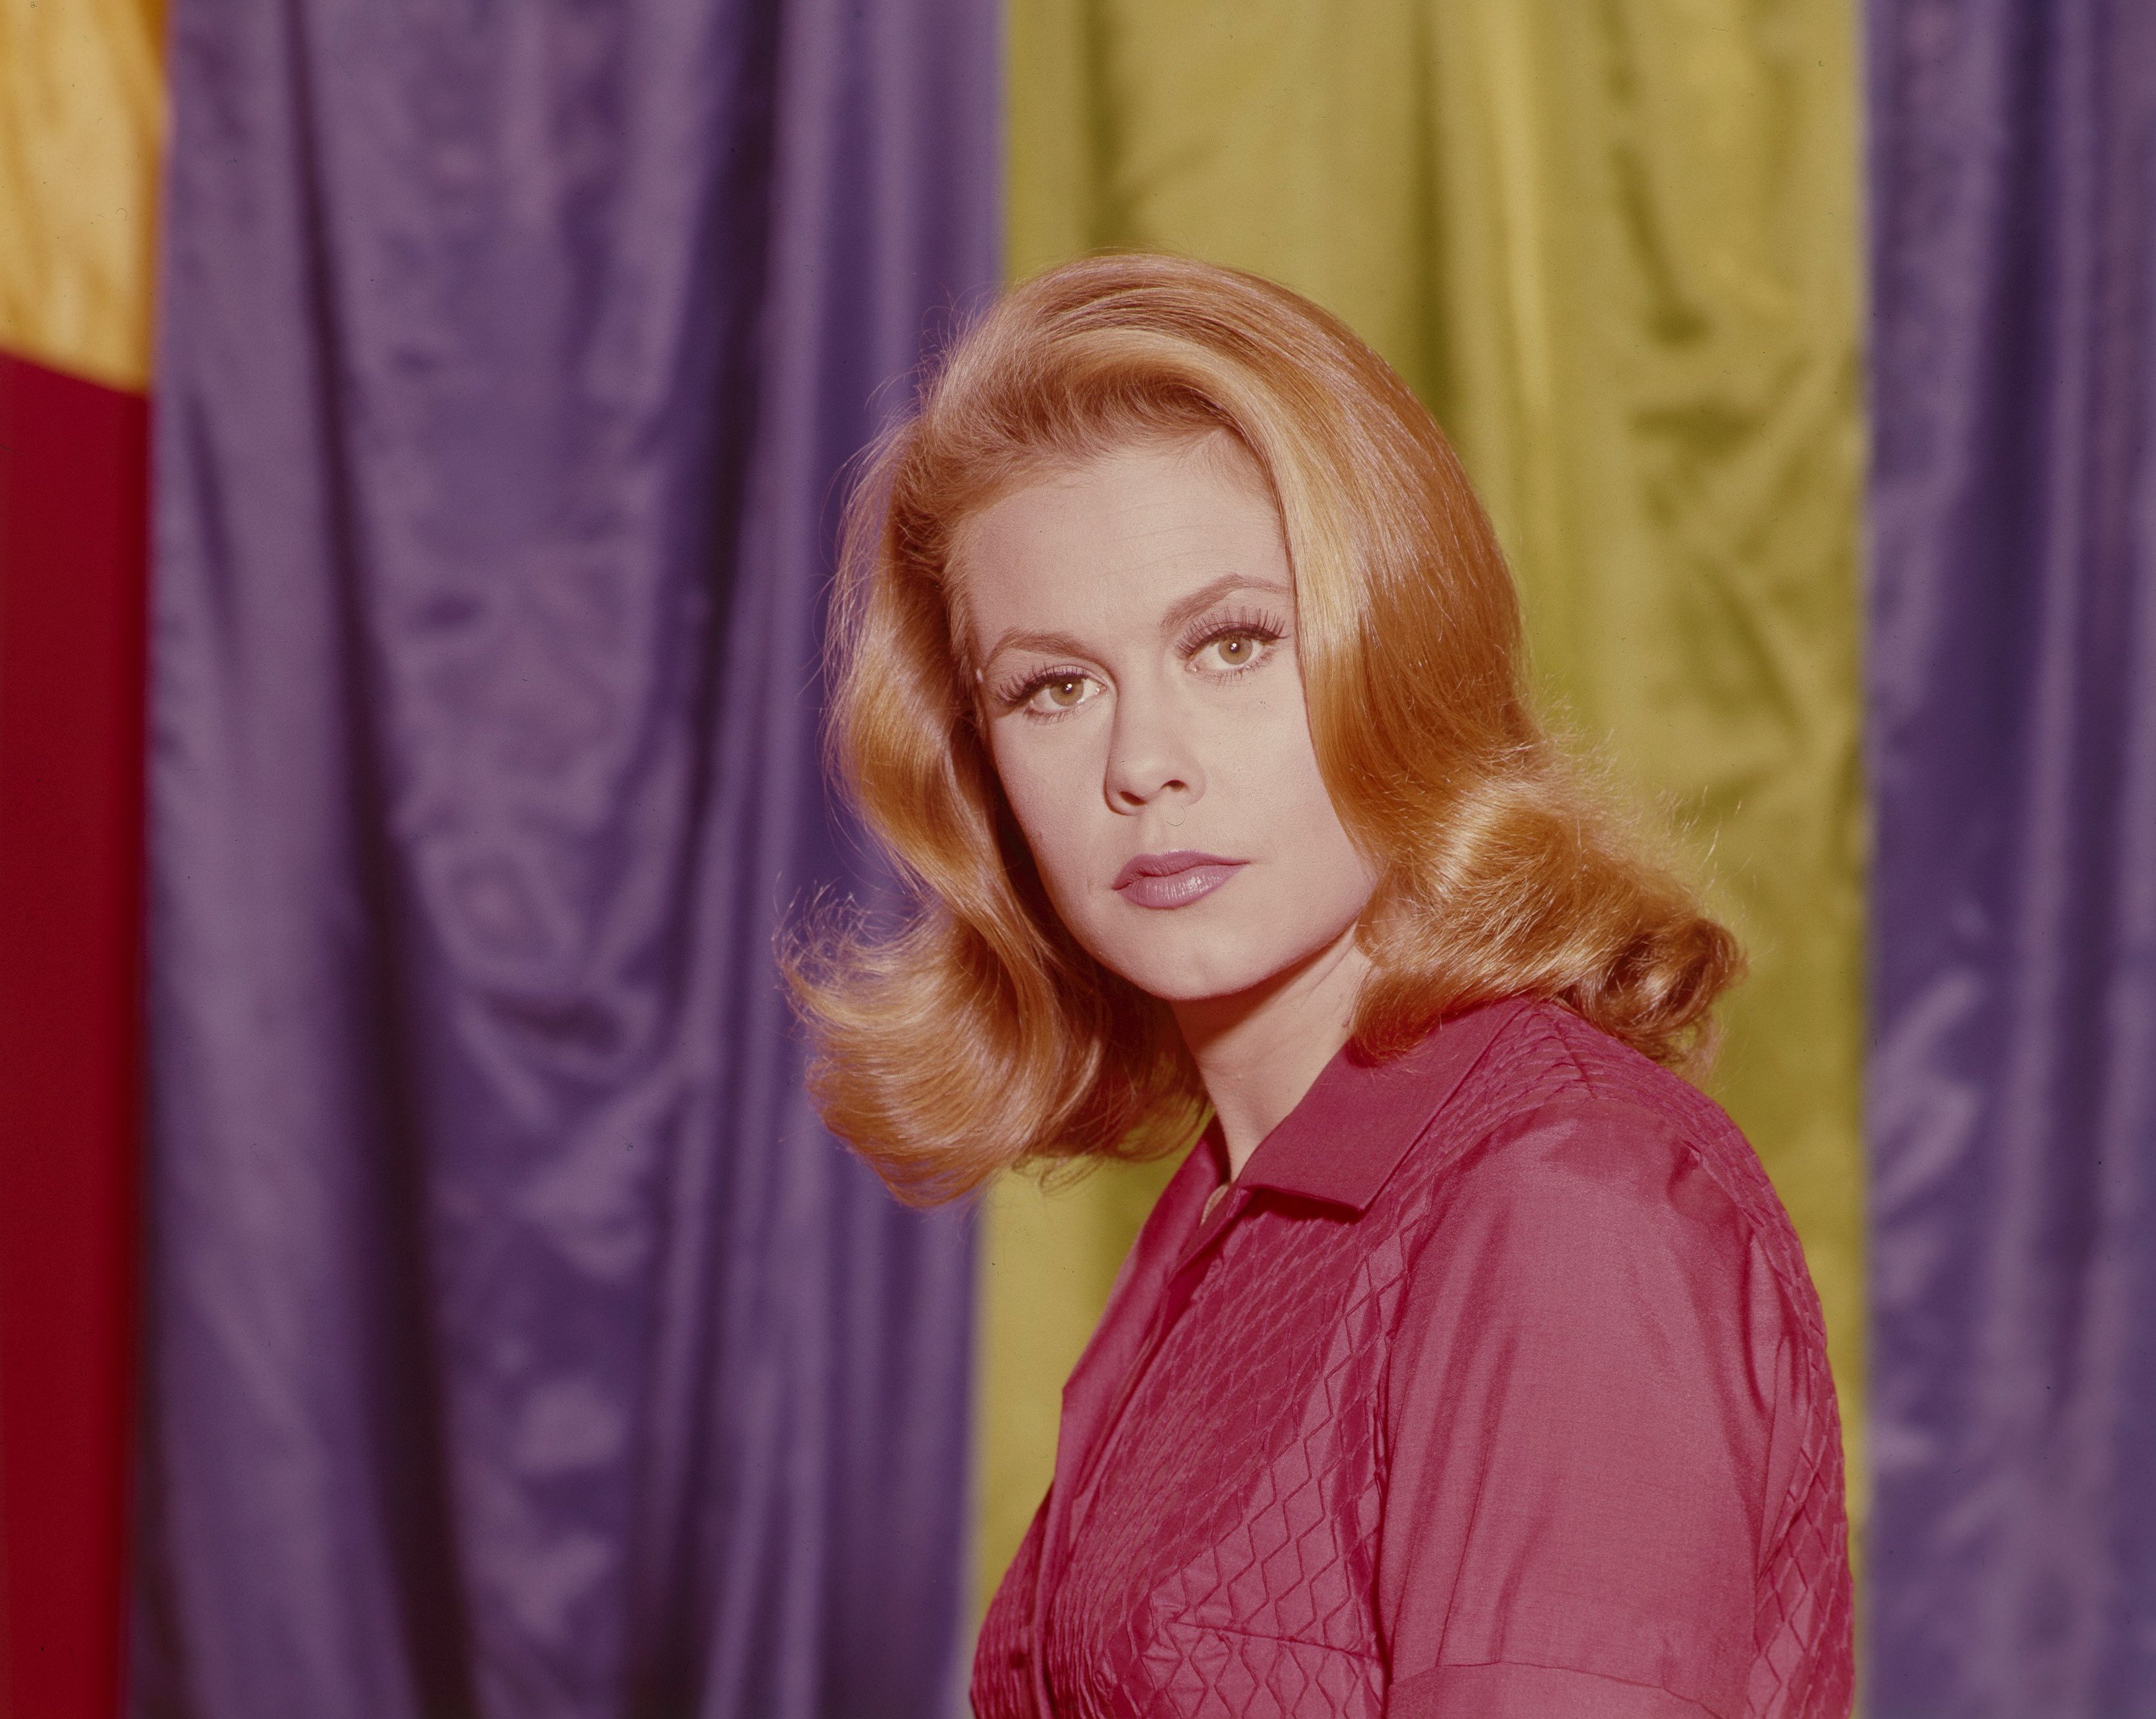 Elizabeth Montgomery on set of "Bewitched" in 1965. | Photo: Getty Images